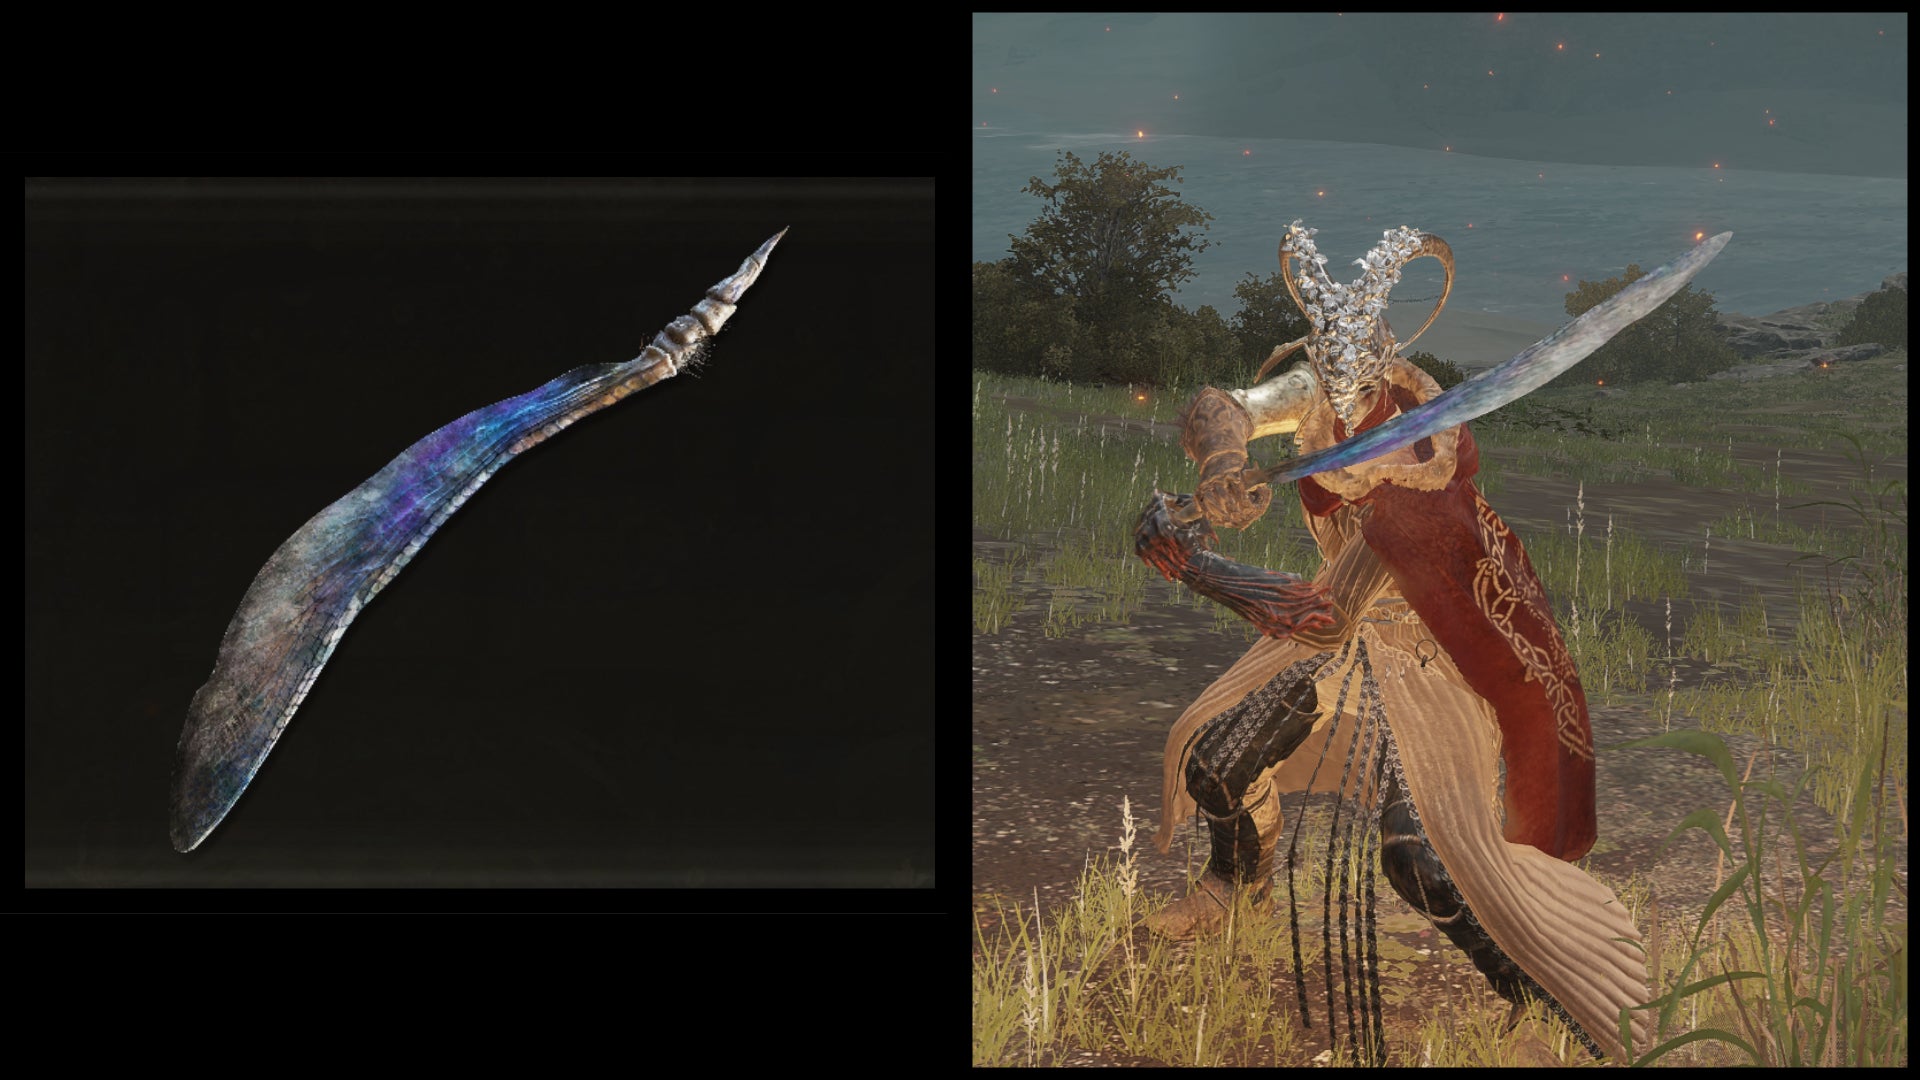 Left: an illustration of the Wing of Astel from Elden Ring. Right: the player character holding the same weapon against a Limgrave background.